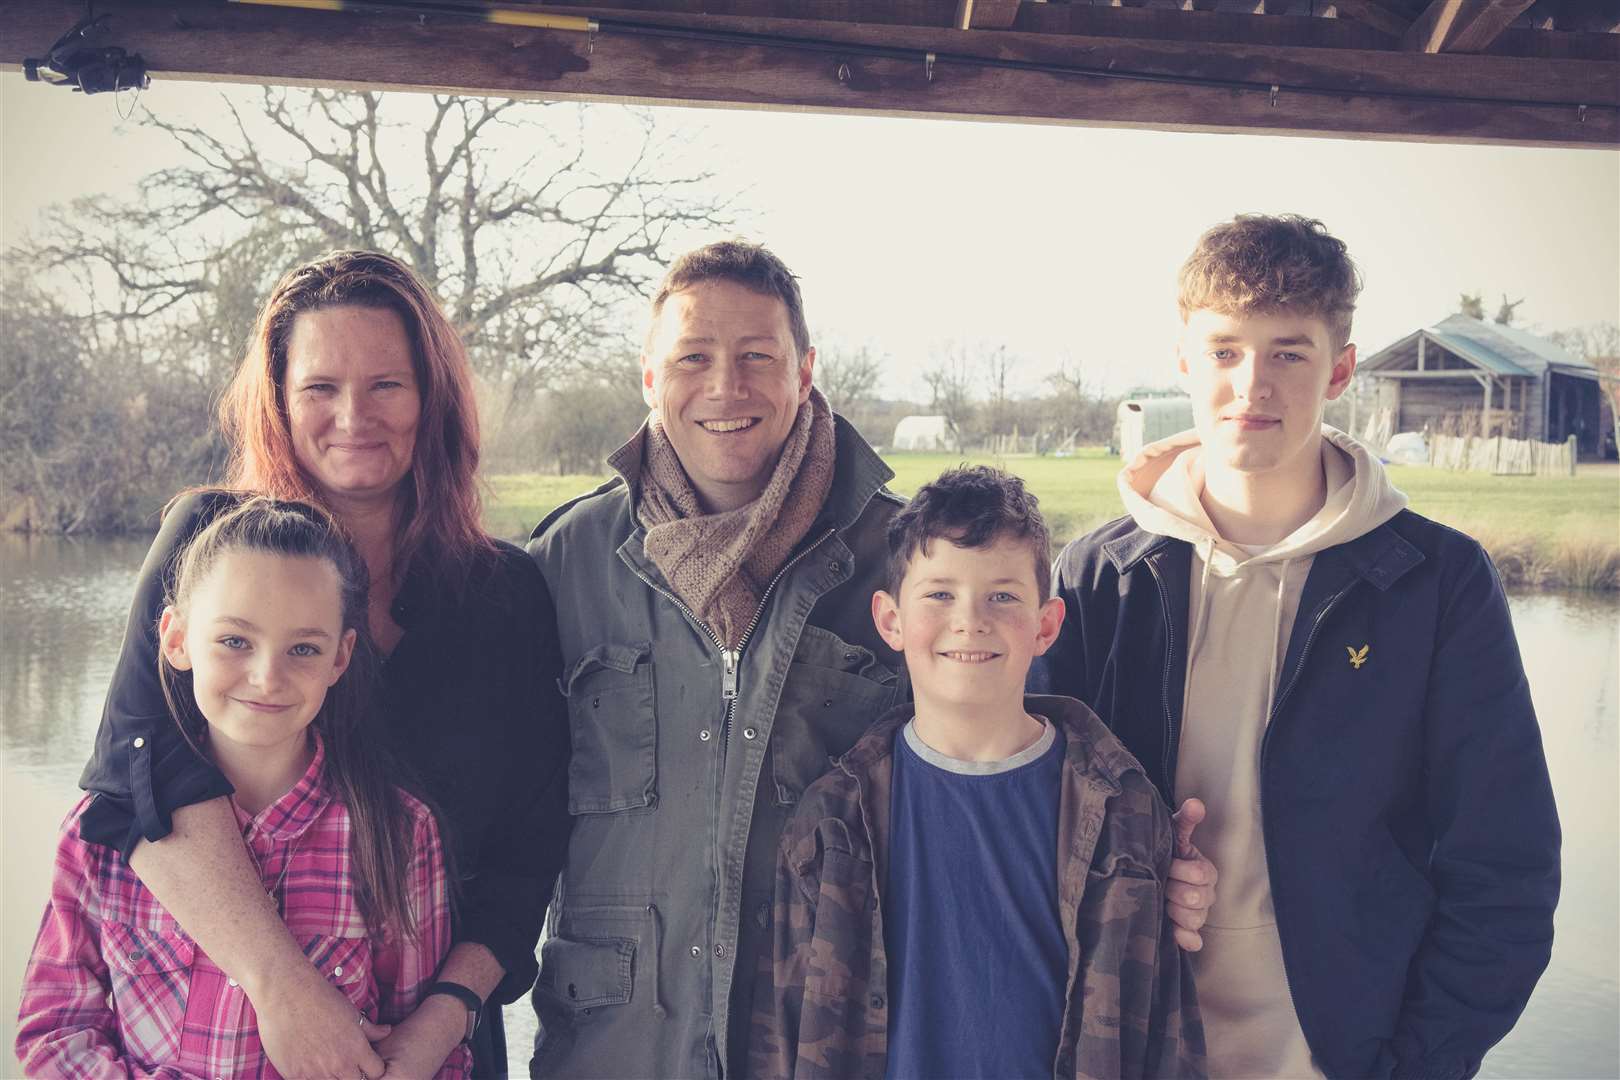 From left: Philippa with daughter Molly, husband Sam with sons Finn and Drake (far right). Philippa Dunstan-Magee